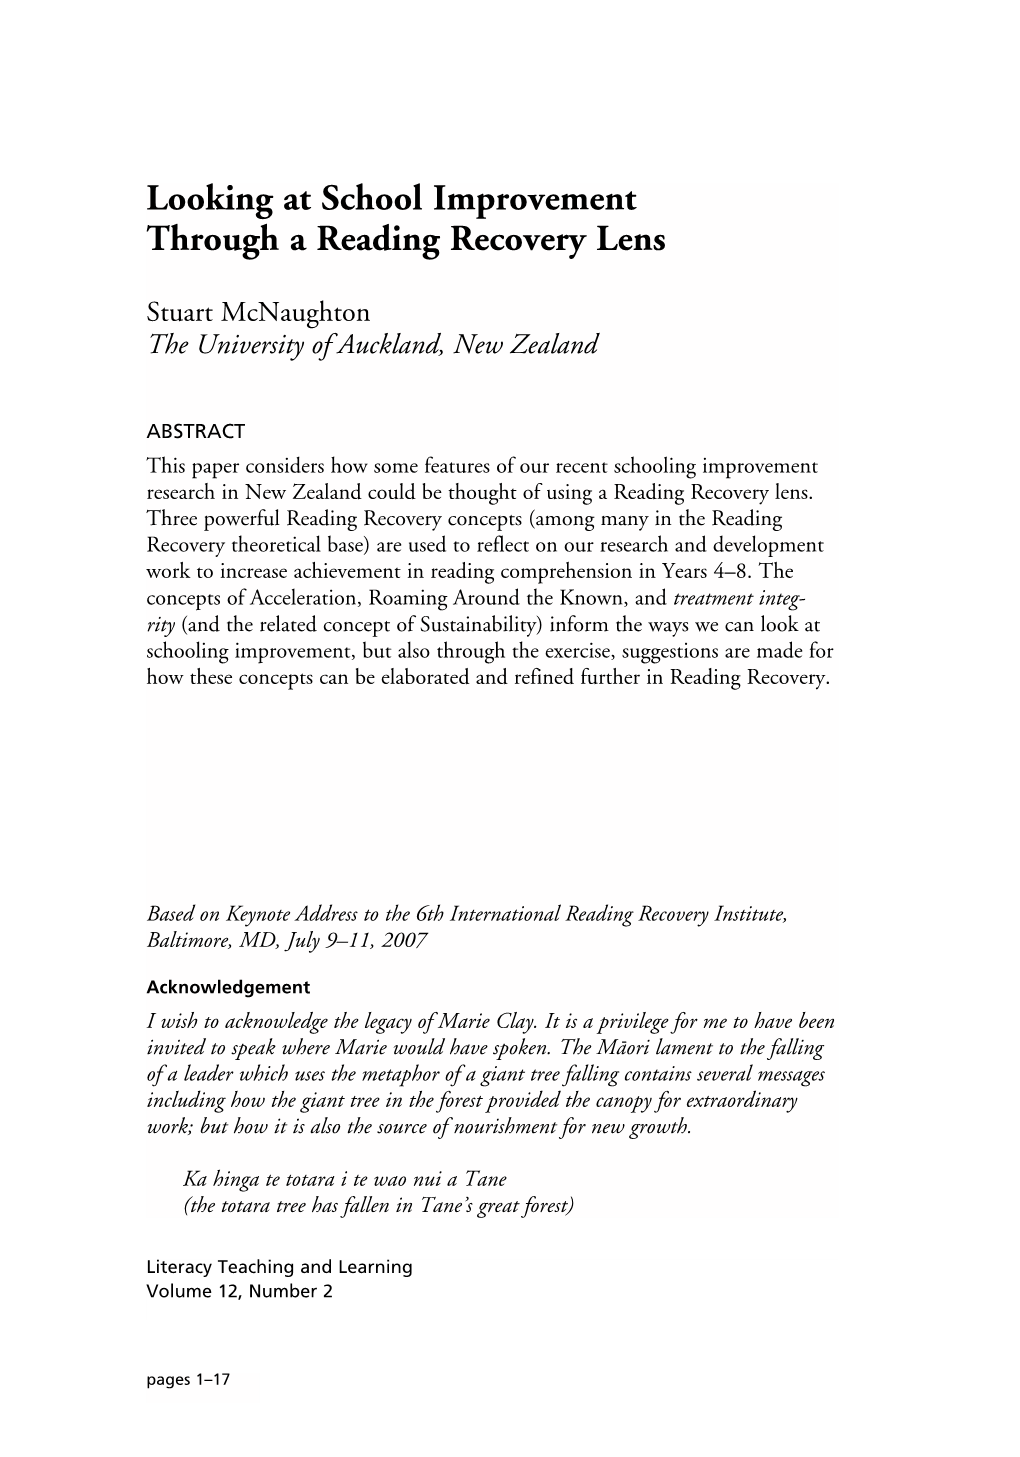 Looking at School Improvement Through a Reading Recovery Lens